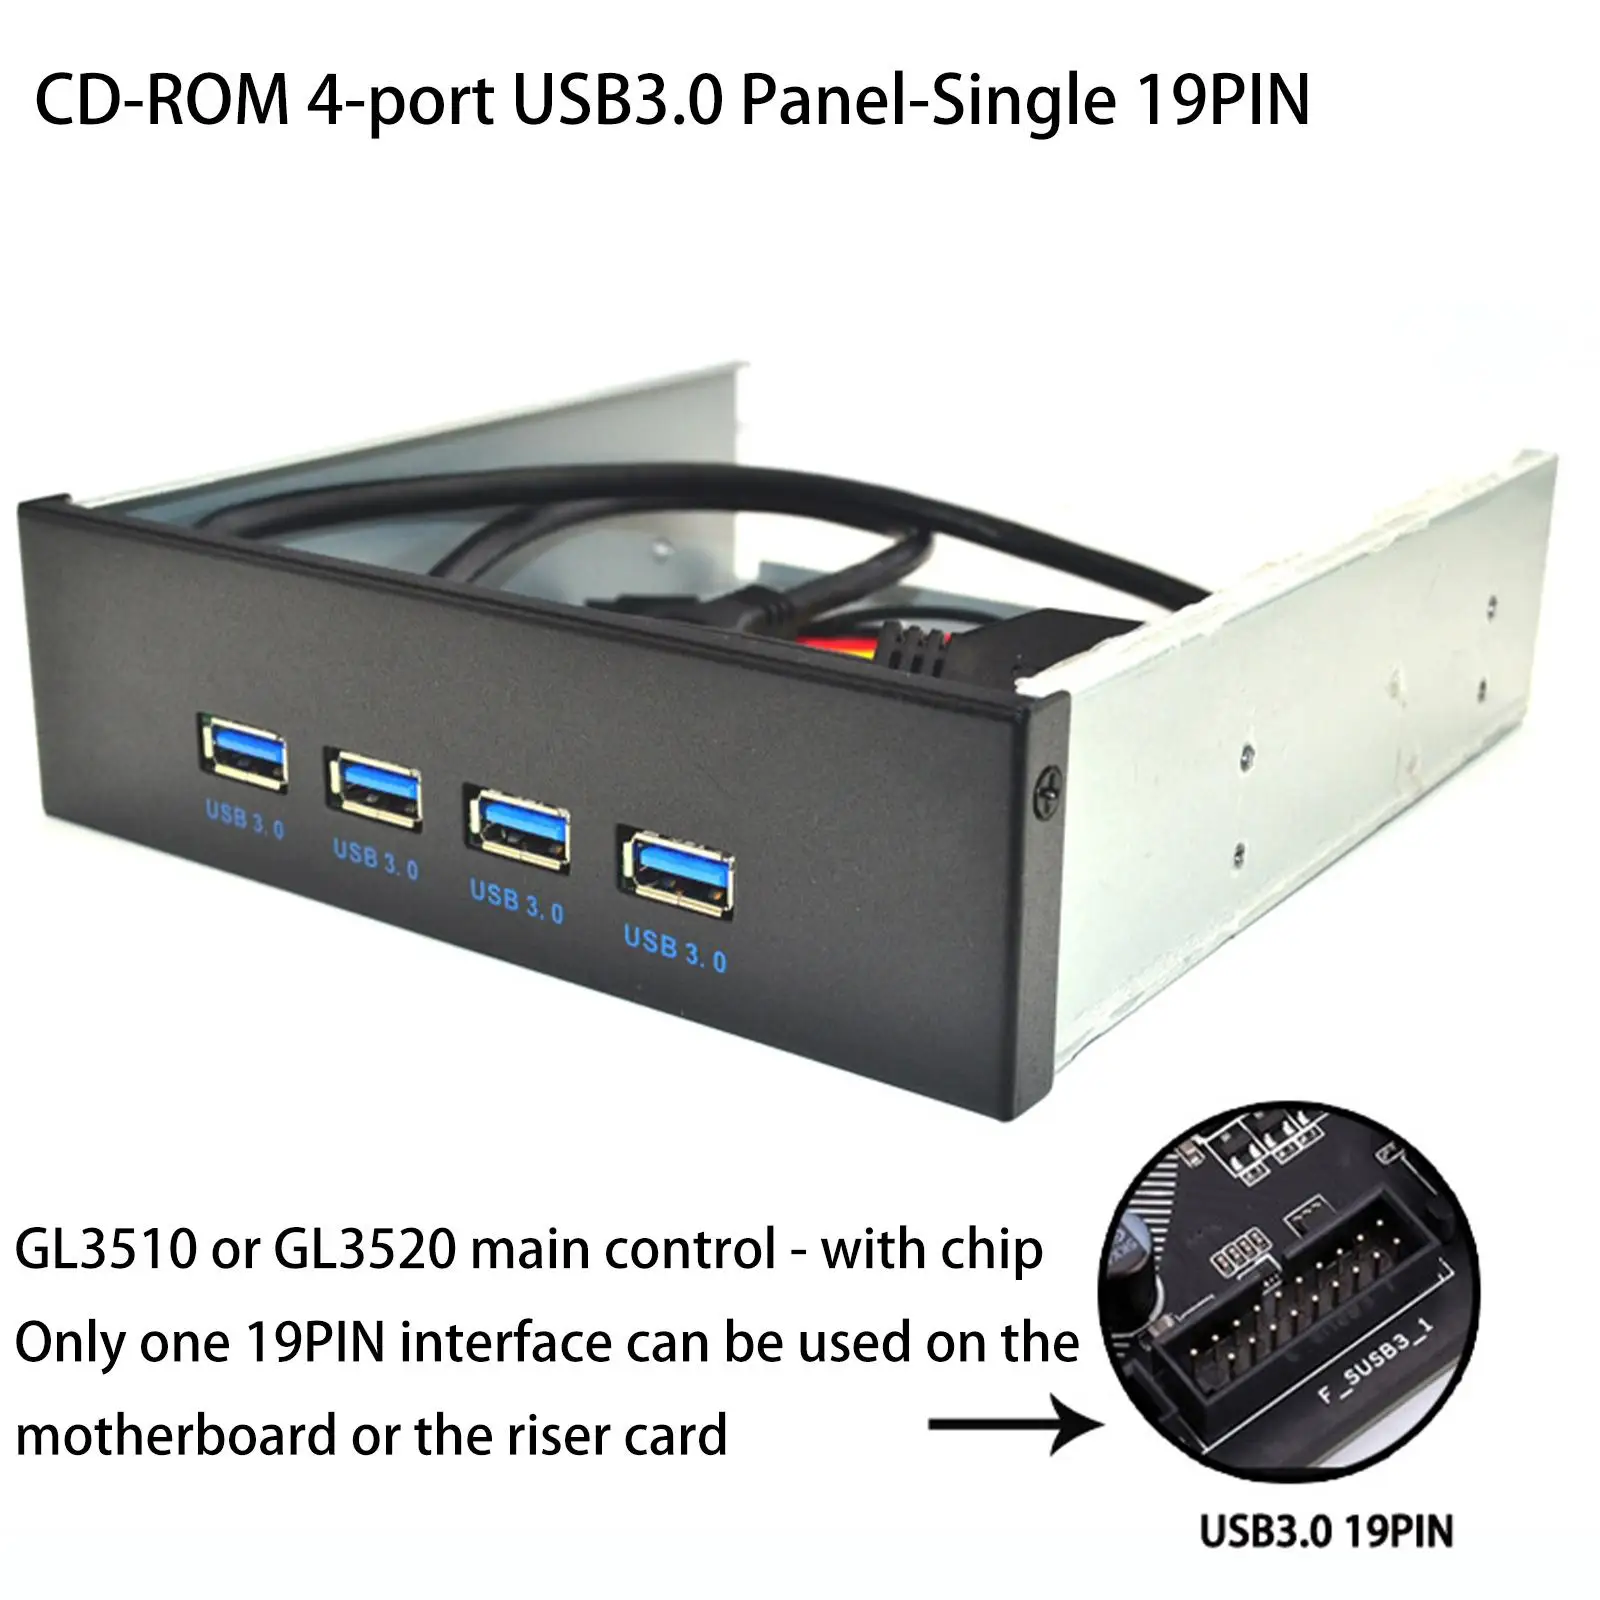 5.25 inch Optical Drive Front Panel 4xUSB3.0 High Speed Multifunction Plug and Play USB 3.0 Hub for Desktop PC Computer